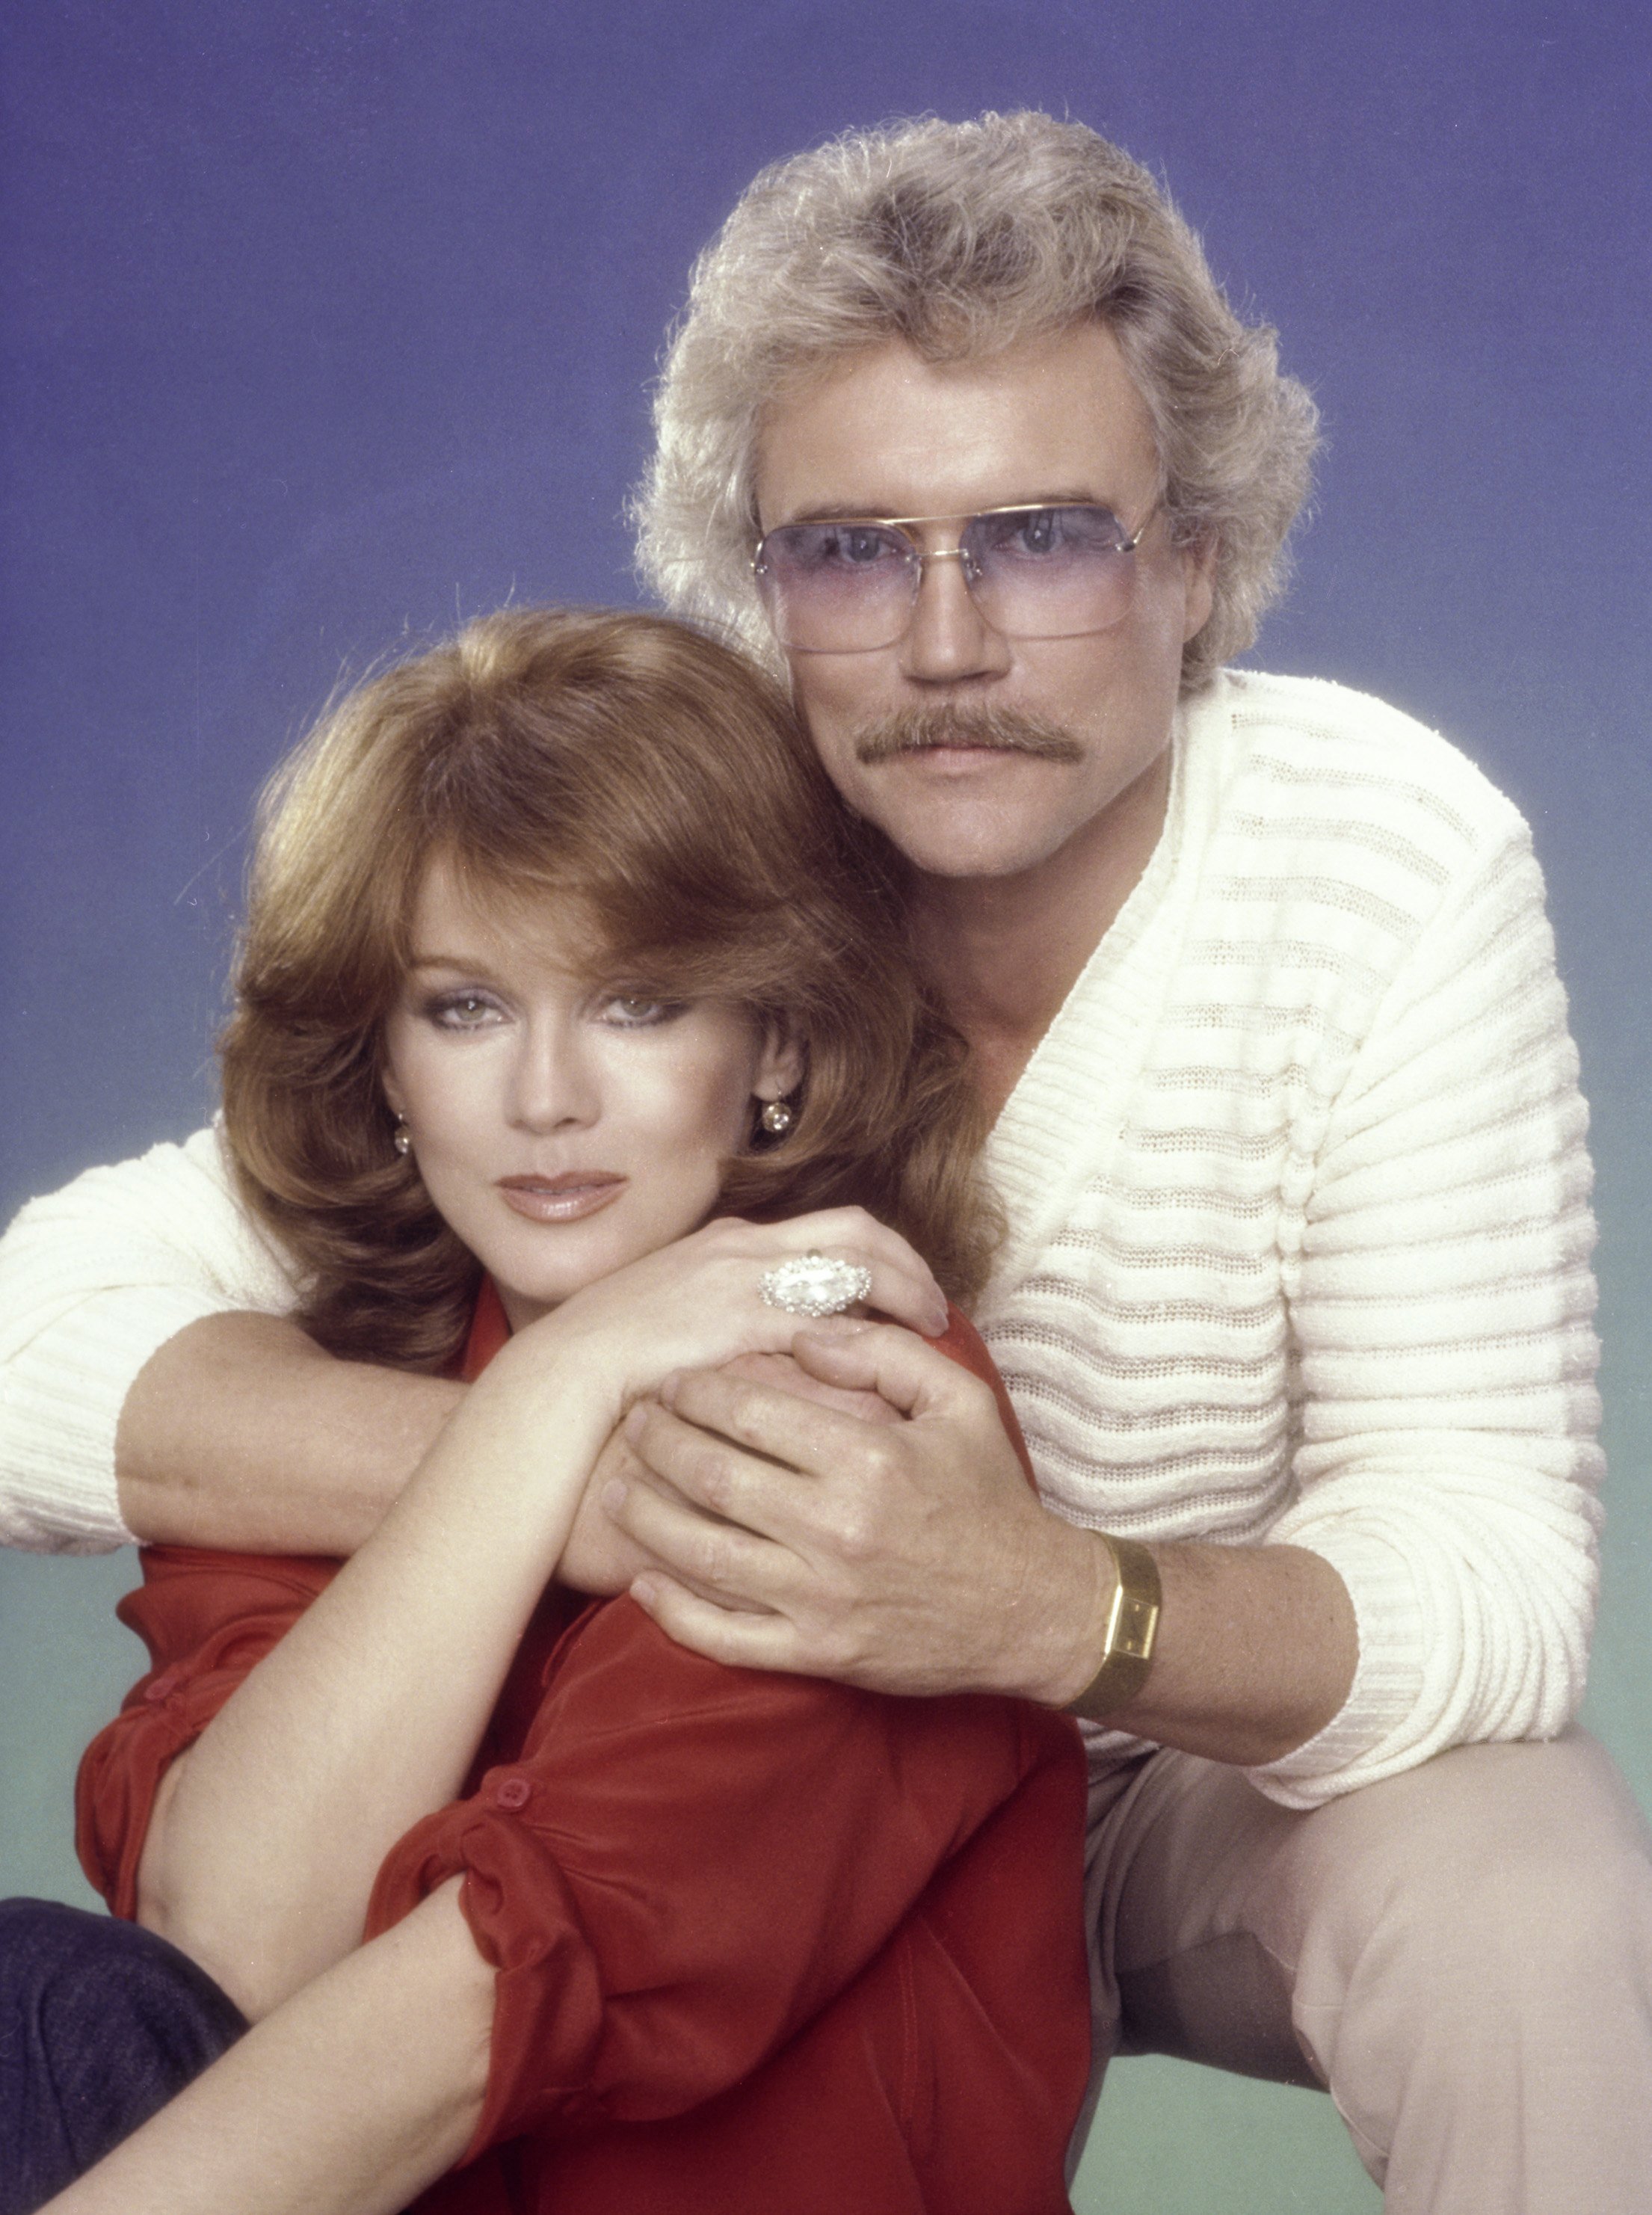 Ann-Margret and husband Roger smith pose for a portrait in 1980 in Los Angeles, California. | Source: Getty Images